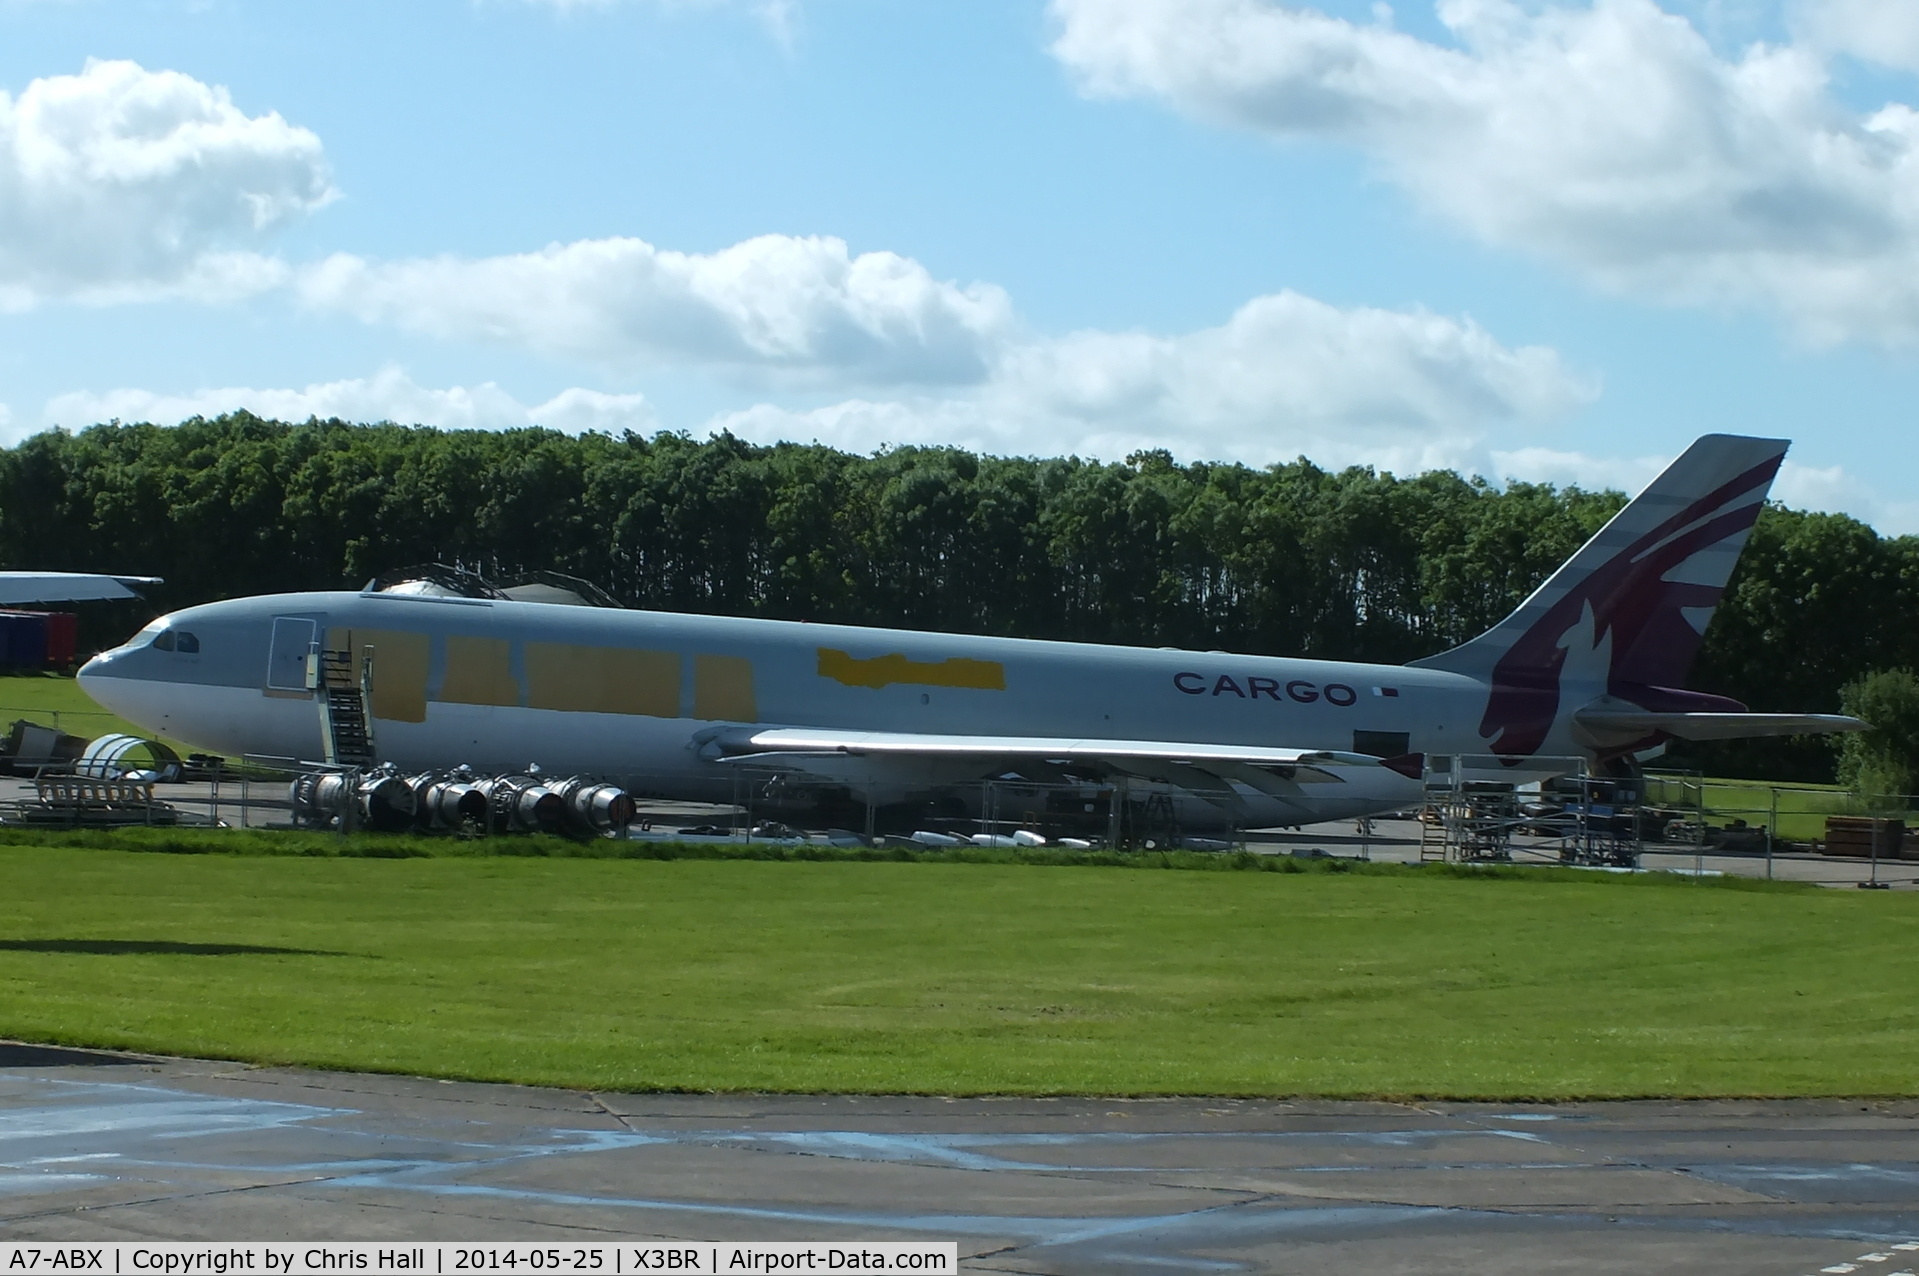 A7-ABX, 1990 Airbus A300B4-622R C/N 554, inthe srapping area at Bruntingthorpe